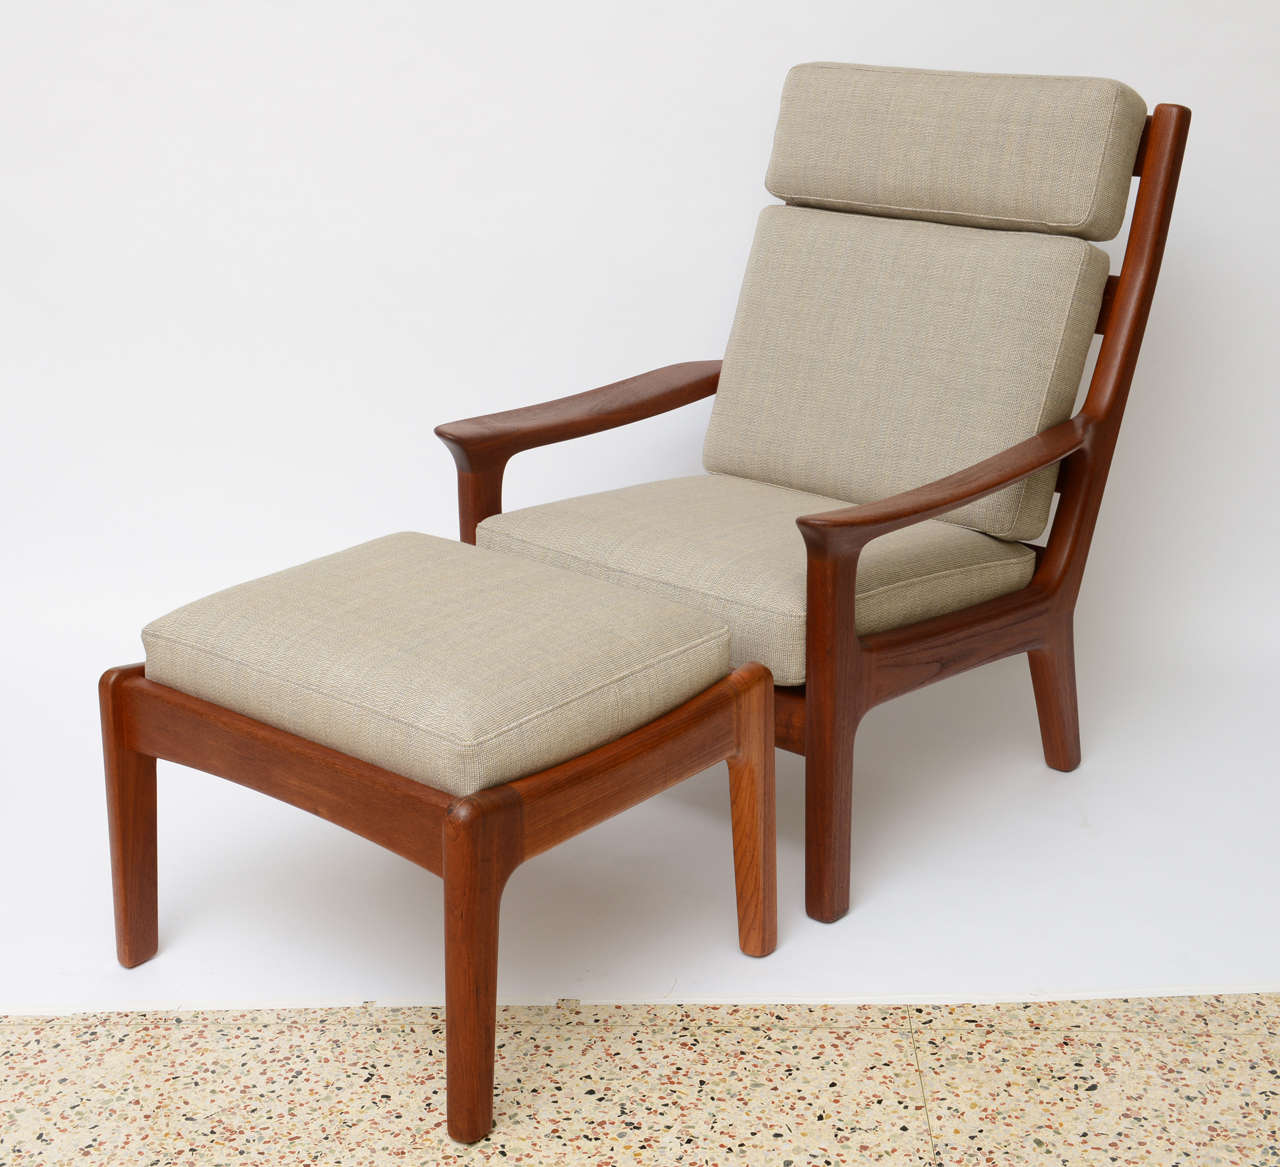 ....SOLD...Beautiful warm hand shaped solid teak highlights this very comfortable high back lounge chair and ottoman.  Made by Brdr Juul Kristensen in Denmark and attributed to Hans Olsen it features wide sculptured arms and lovely sloping profile. 